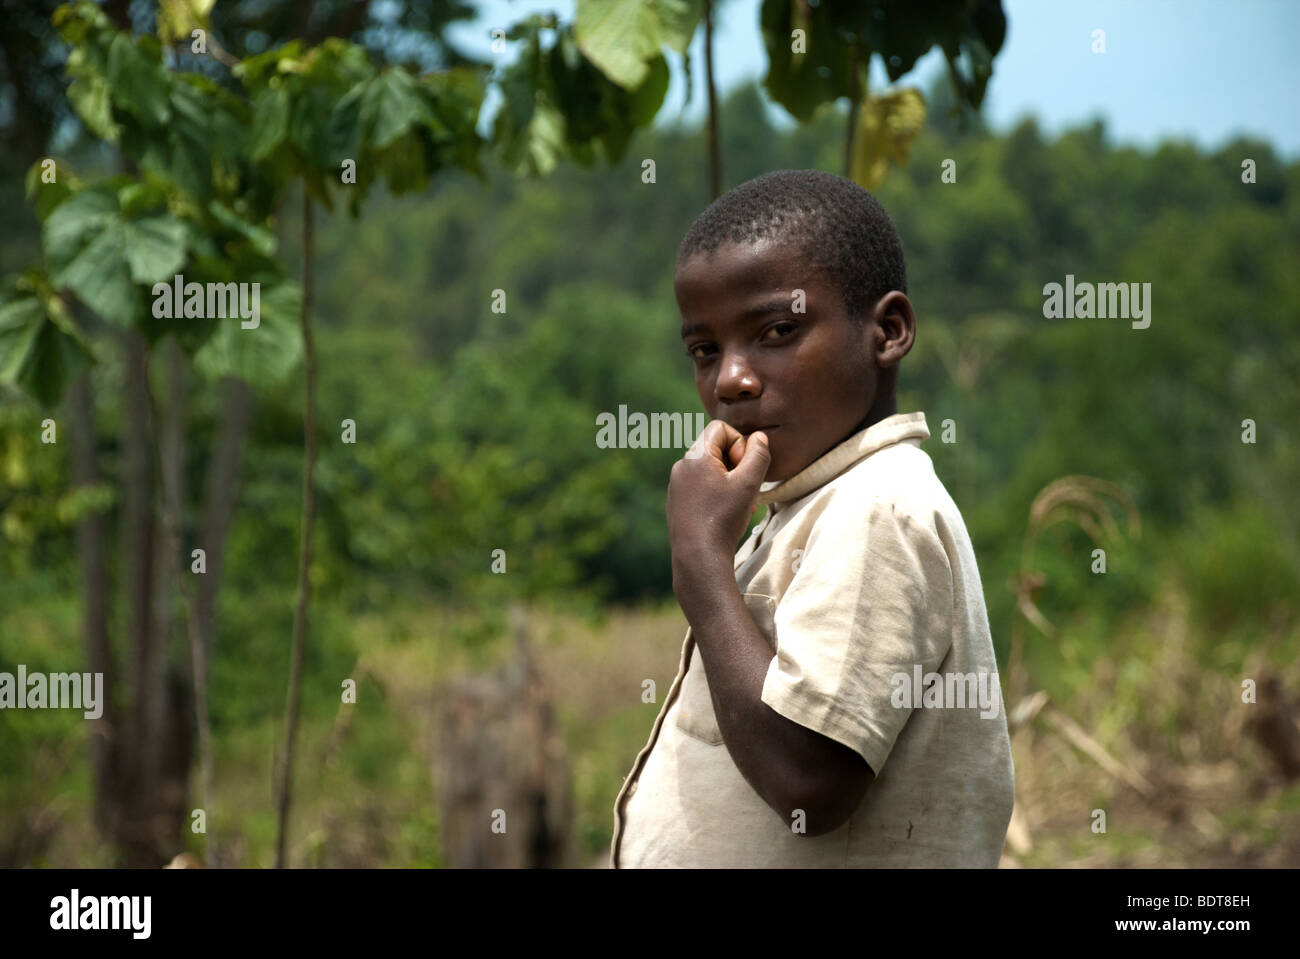 A young boy in western Uganda surveys the crops in his fathers field Stock Photo